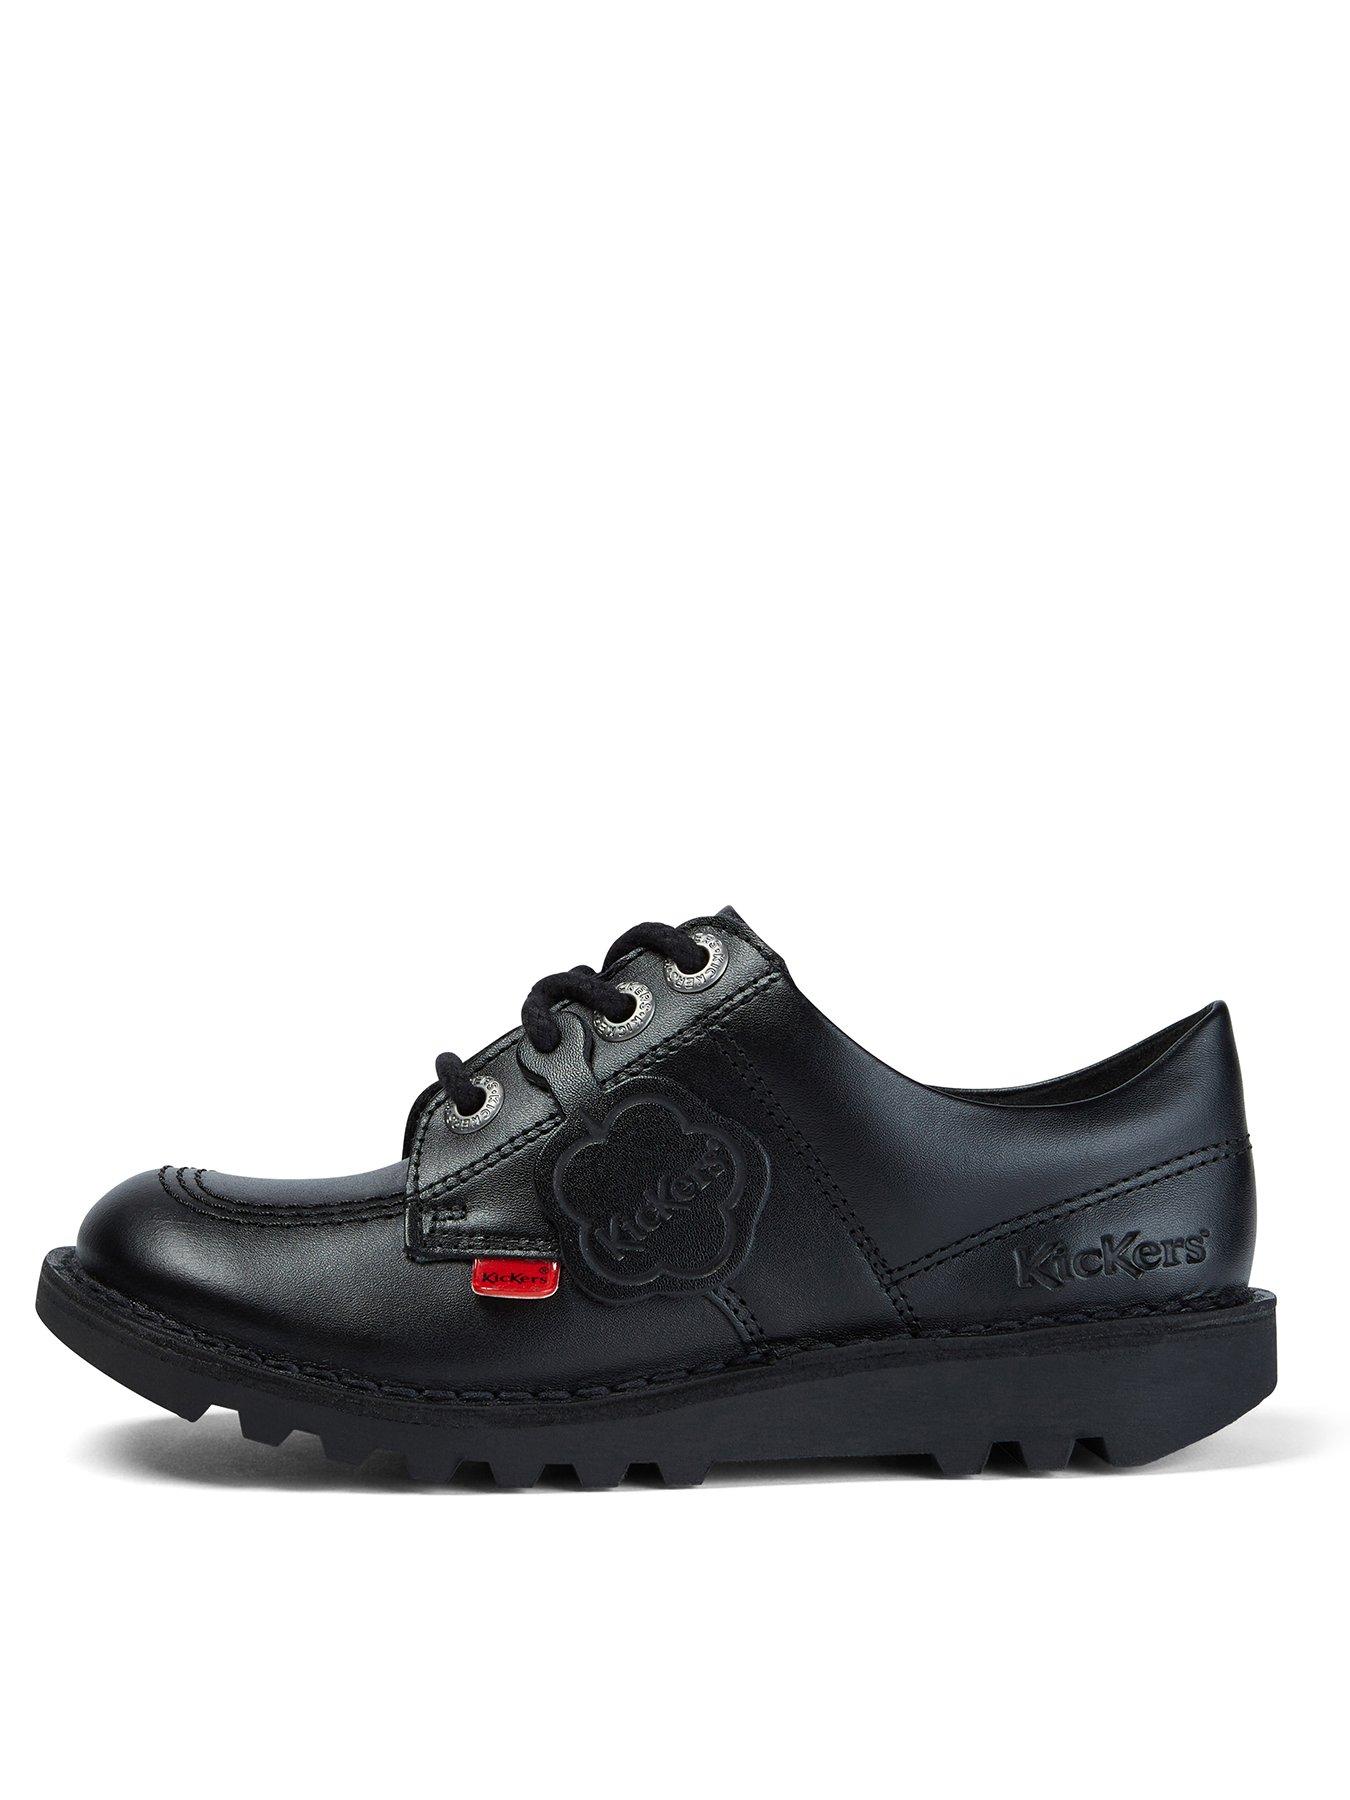 Kix Laces Black Lace Up School Shoes, Size: 4 at best price in